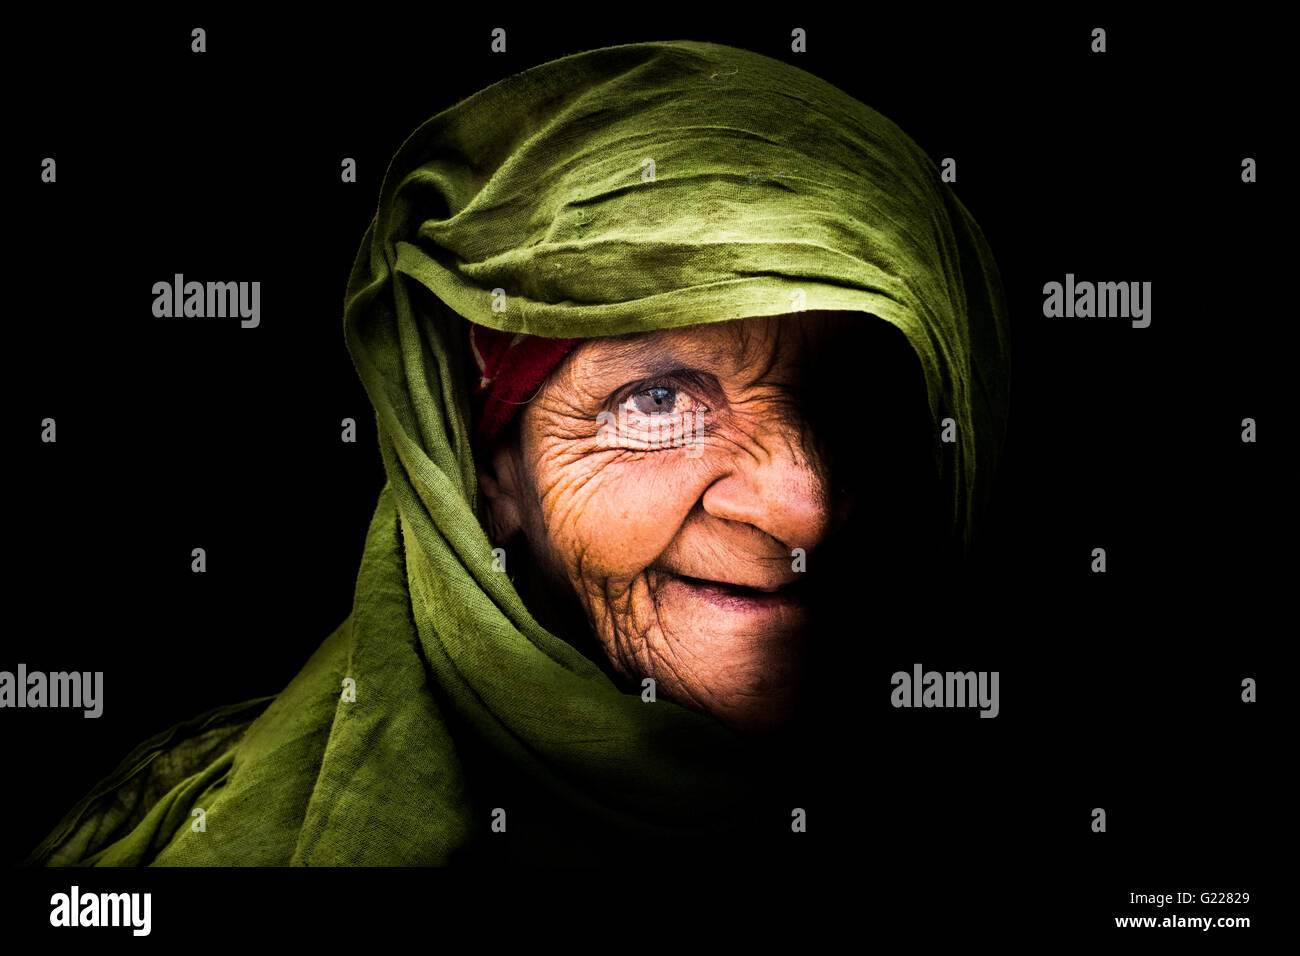 Woman wearing green head cover in Delhi, India Stock Photo